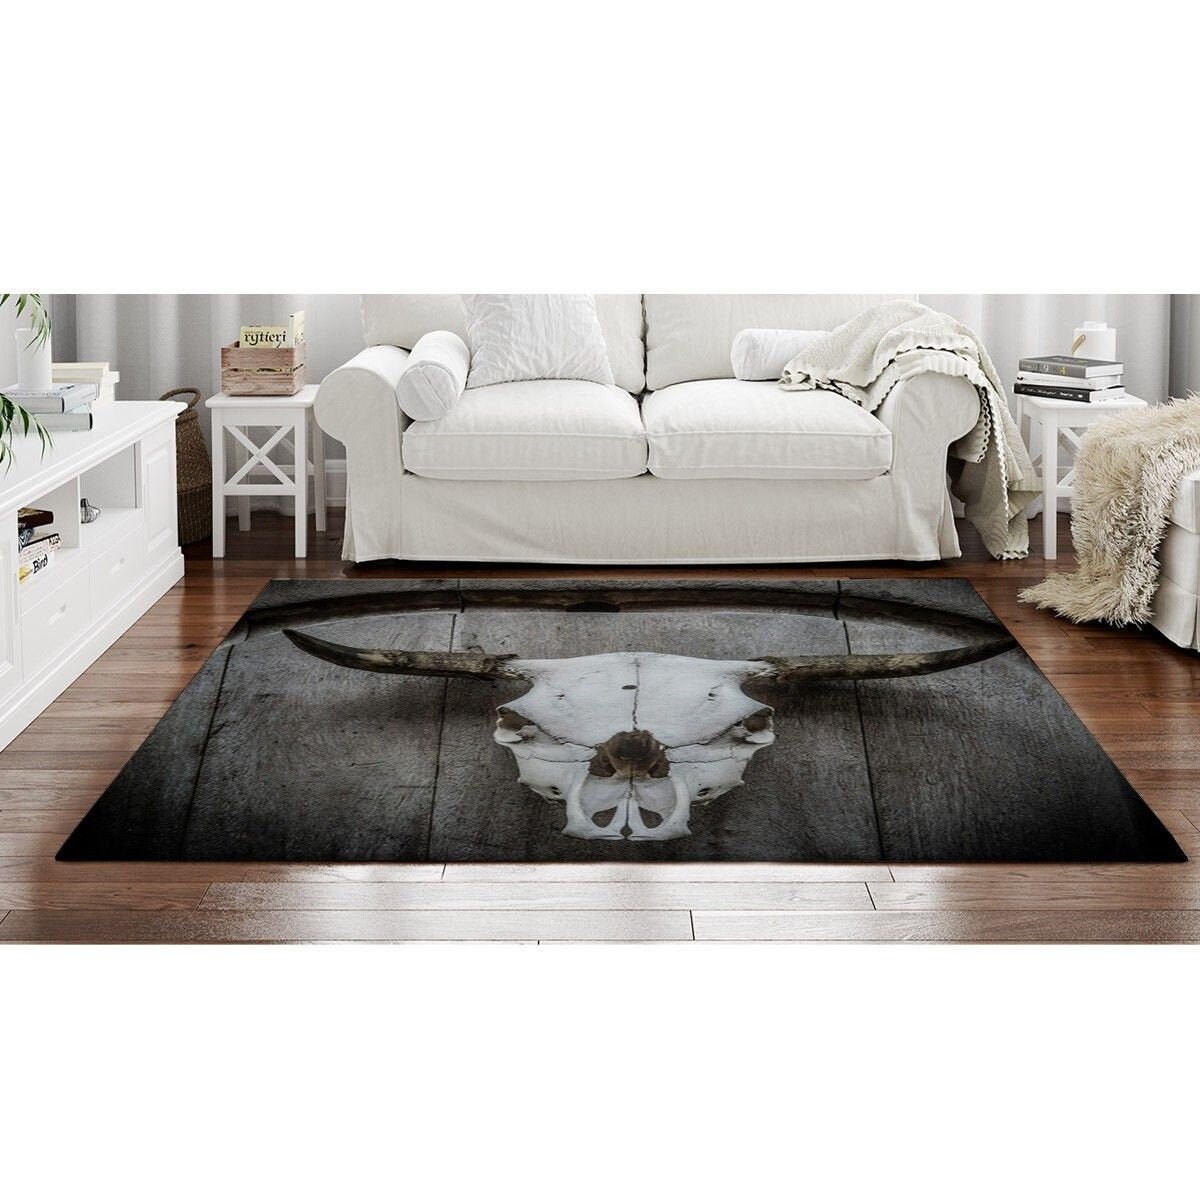 Rustic Low Profile Entry Rugs - Retro Barn Country Linens